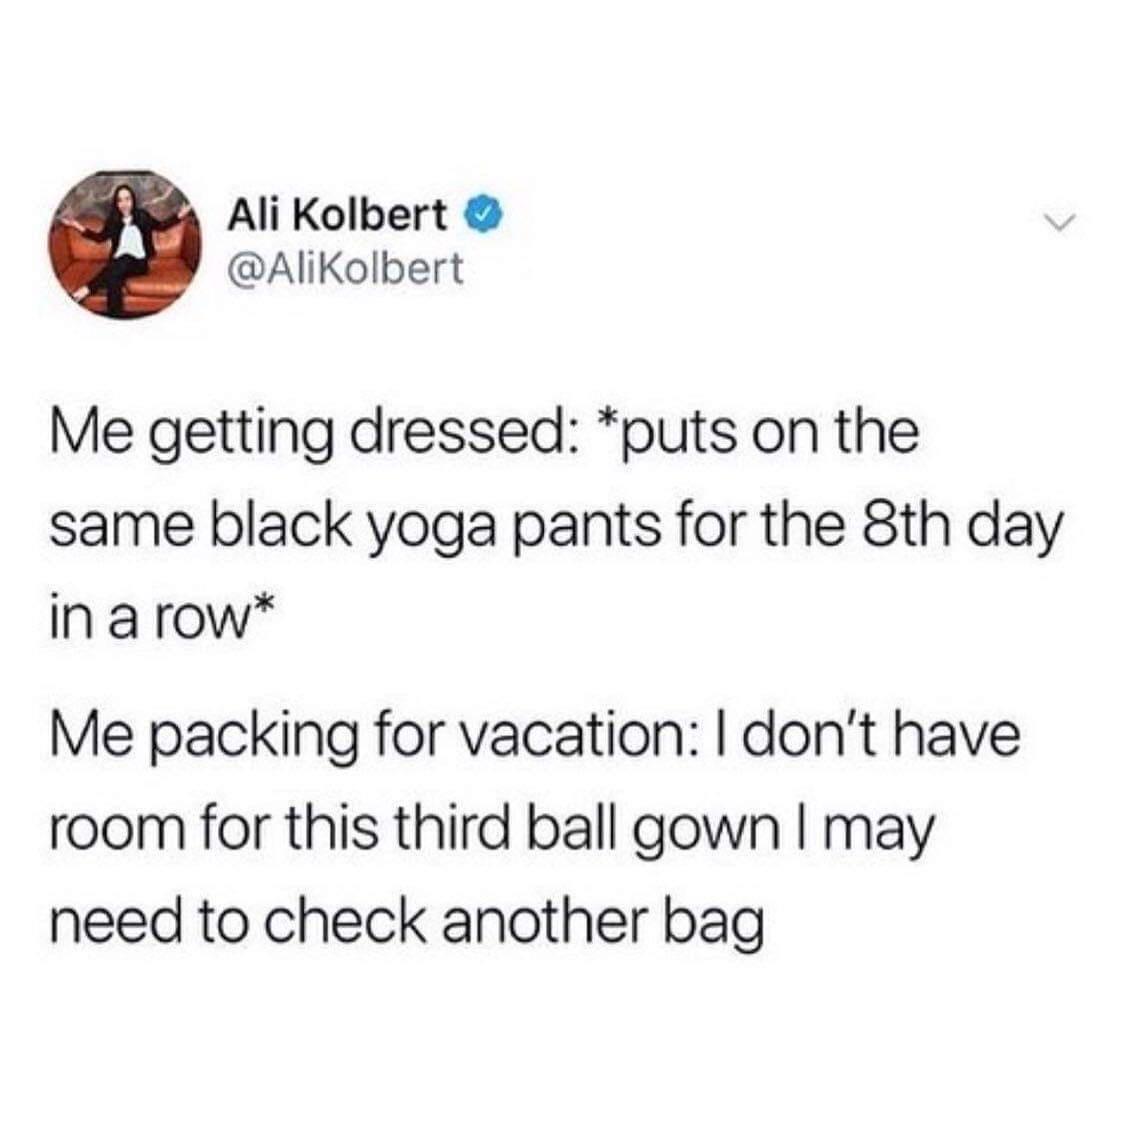 monday morning randomness - packing for vacation meme - Ali Kolbert Me getting dressed puts on the same black yoga pants for the 8th day in a row Me packing for vacation I don't have room for this third ball gown I may need to check another bag